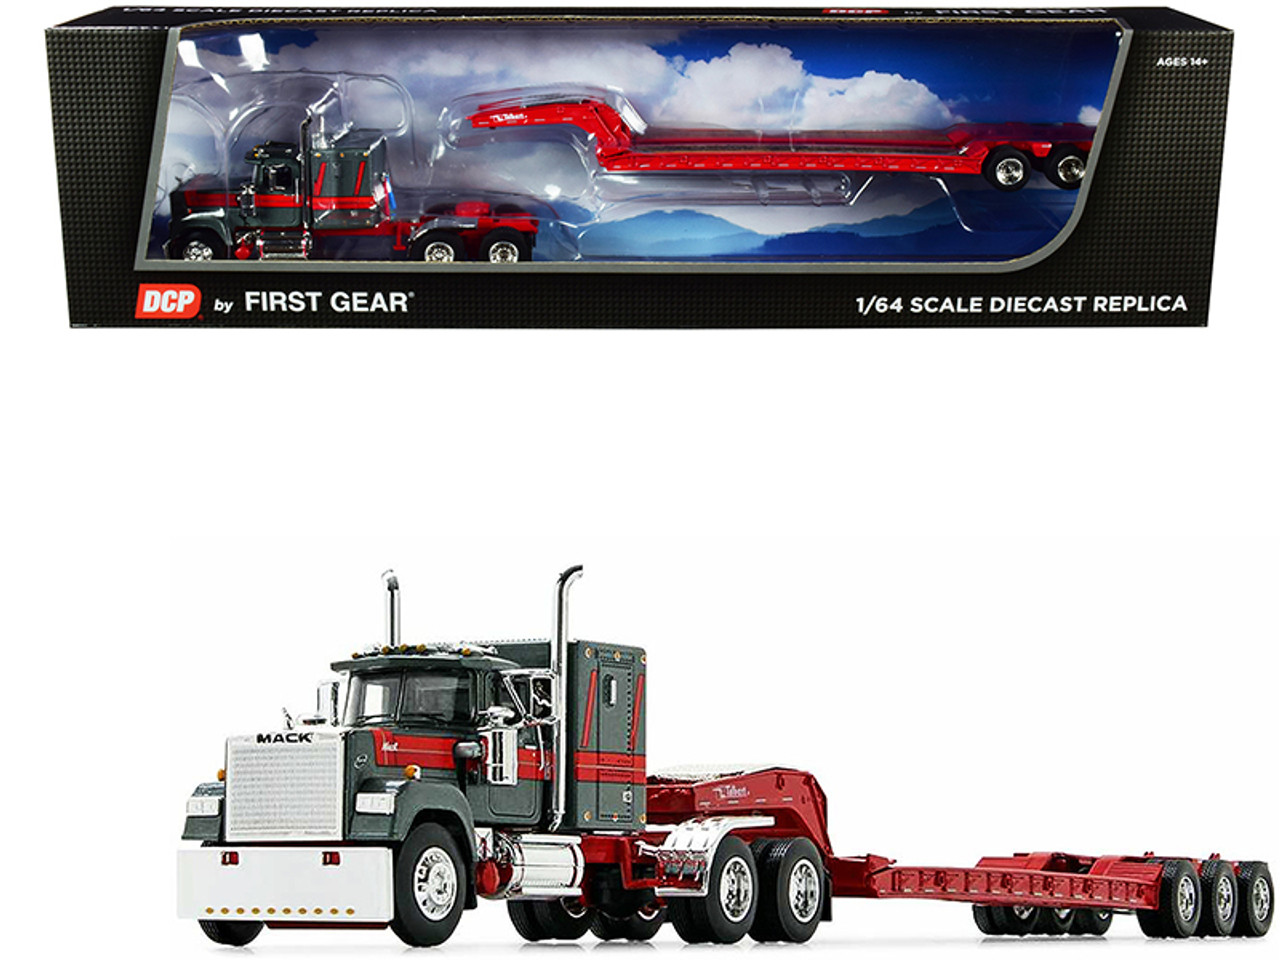 Mack Super-Liner with 60" Sleeper Cab with Talbert Tri-Axle Lowboy Trailer Gun Metal Green and Mack Red 1/64 Diecast Model by DCP/First Gear